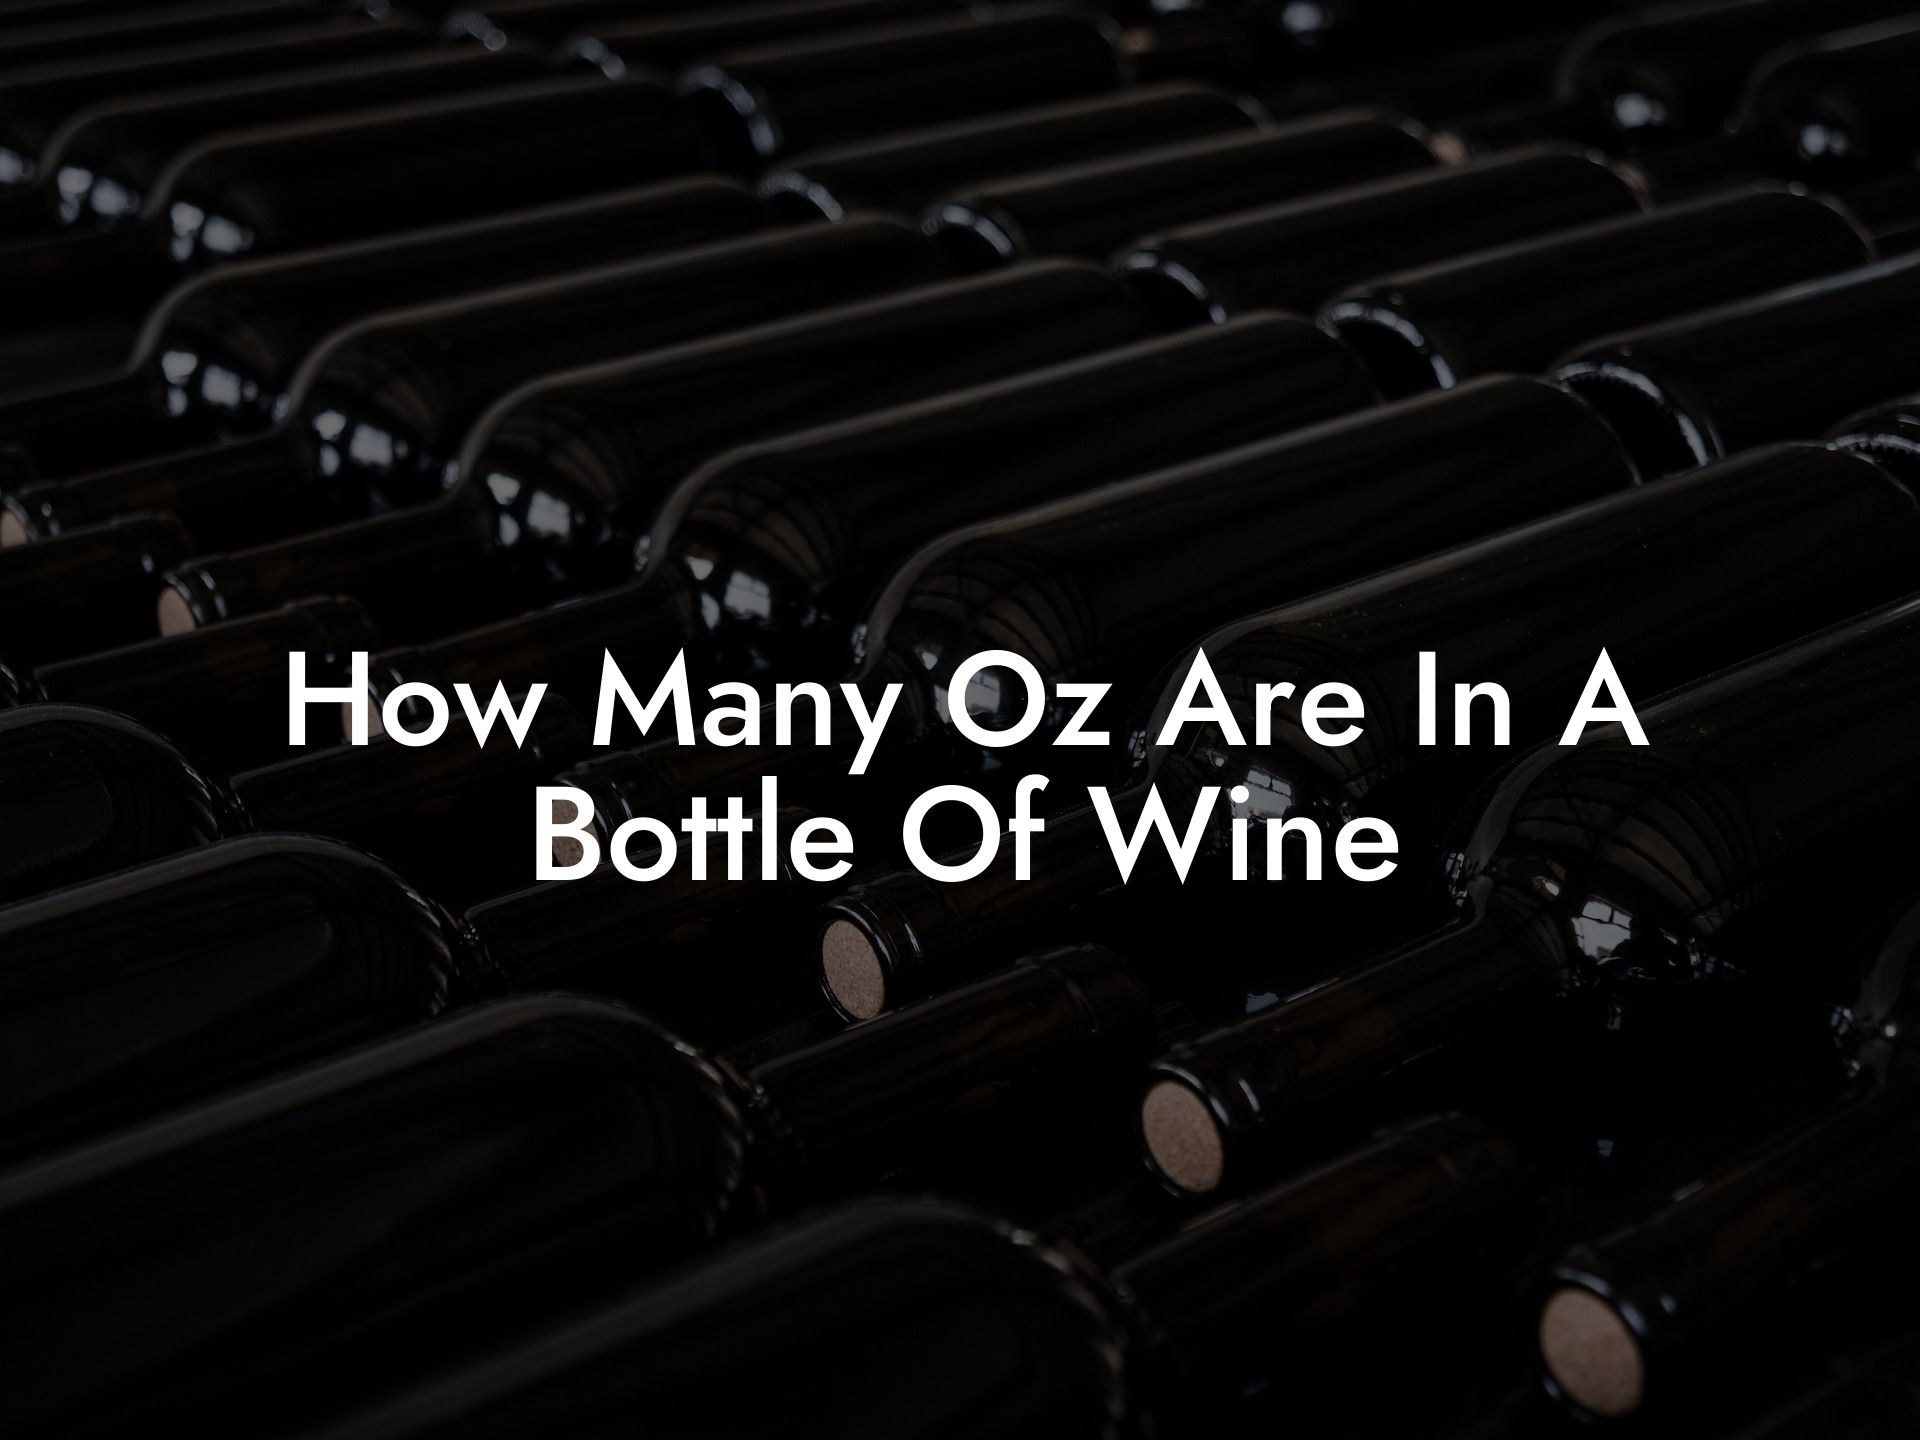 How Many Oz Are In A Bottle Of Wine